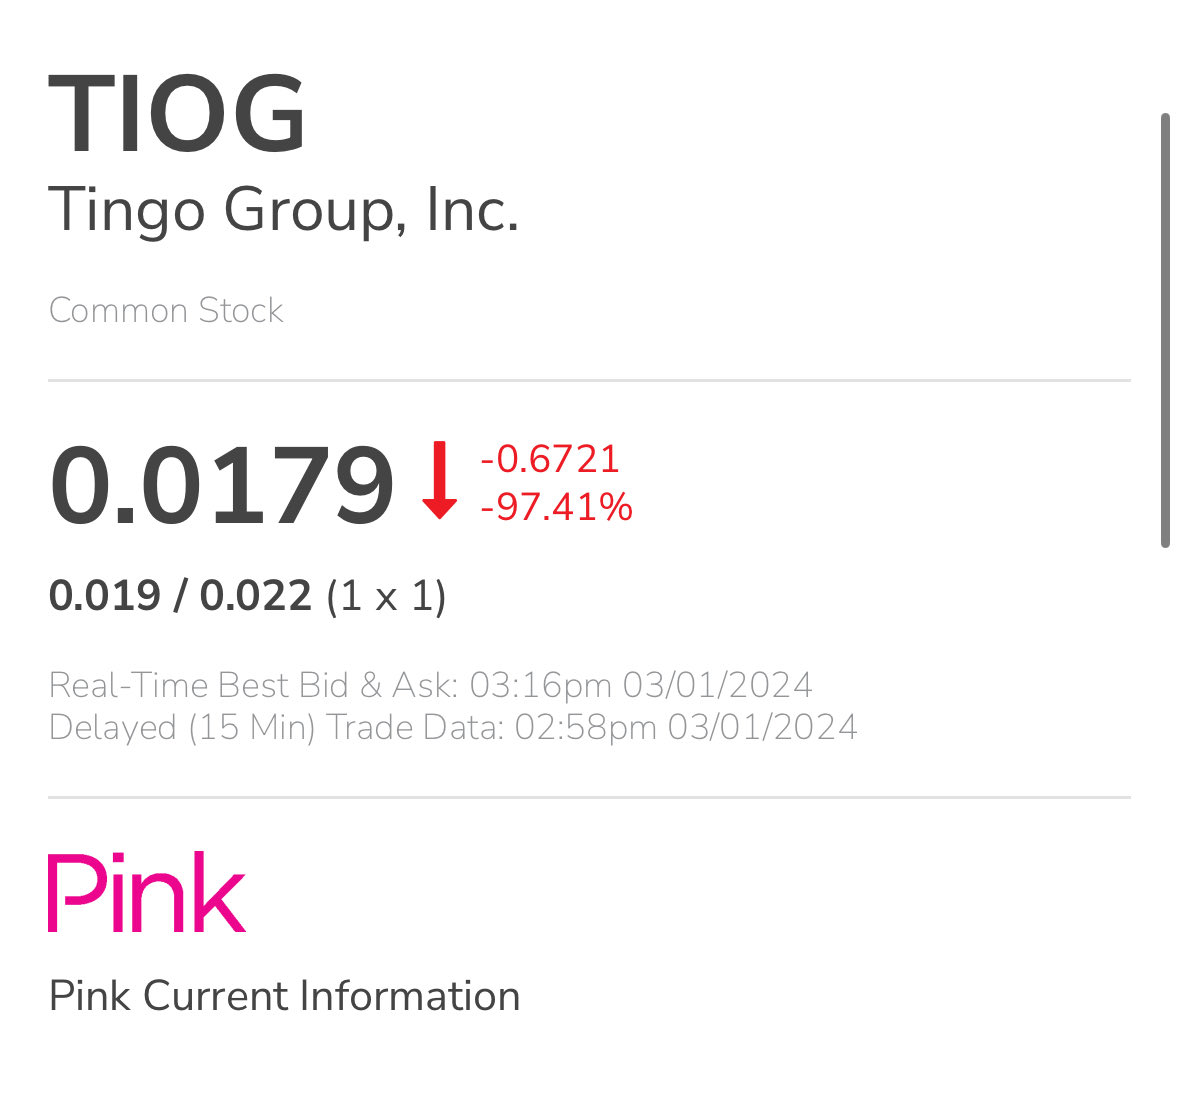 After a 3.5 month trading halt, Tingo Group was delisted from the Nasdaq exchange today and began trading on the OTC pink sheets. The stock plummeted over 97%. Time will tell if Deloitte faces any liability for damages over its audit failure.